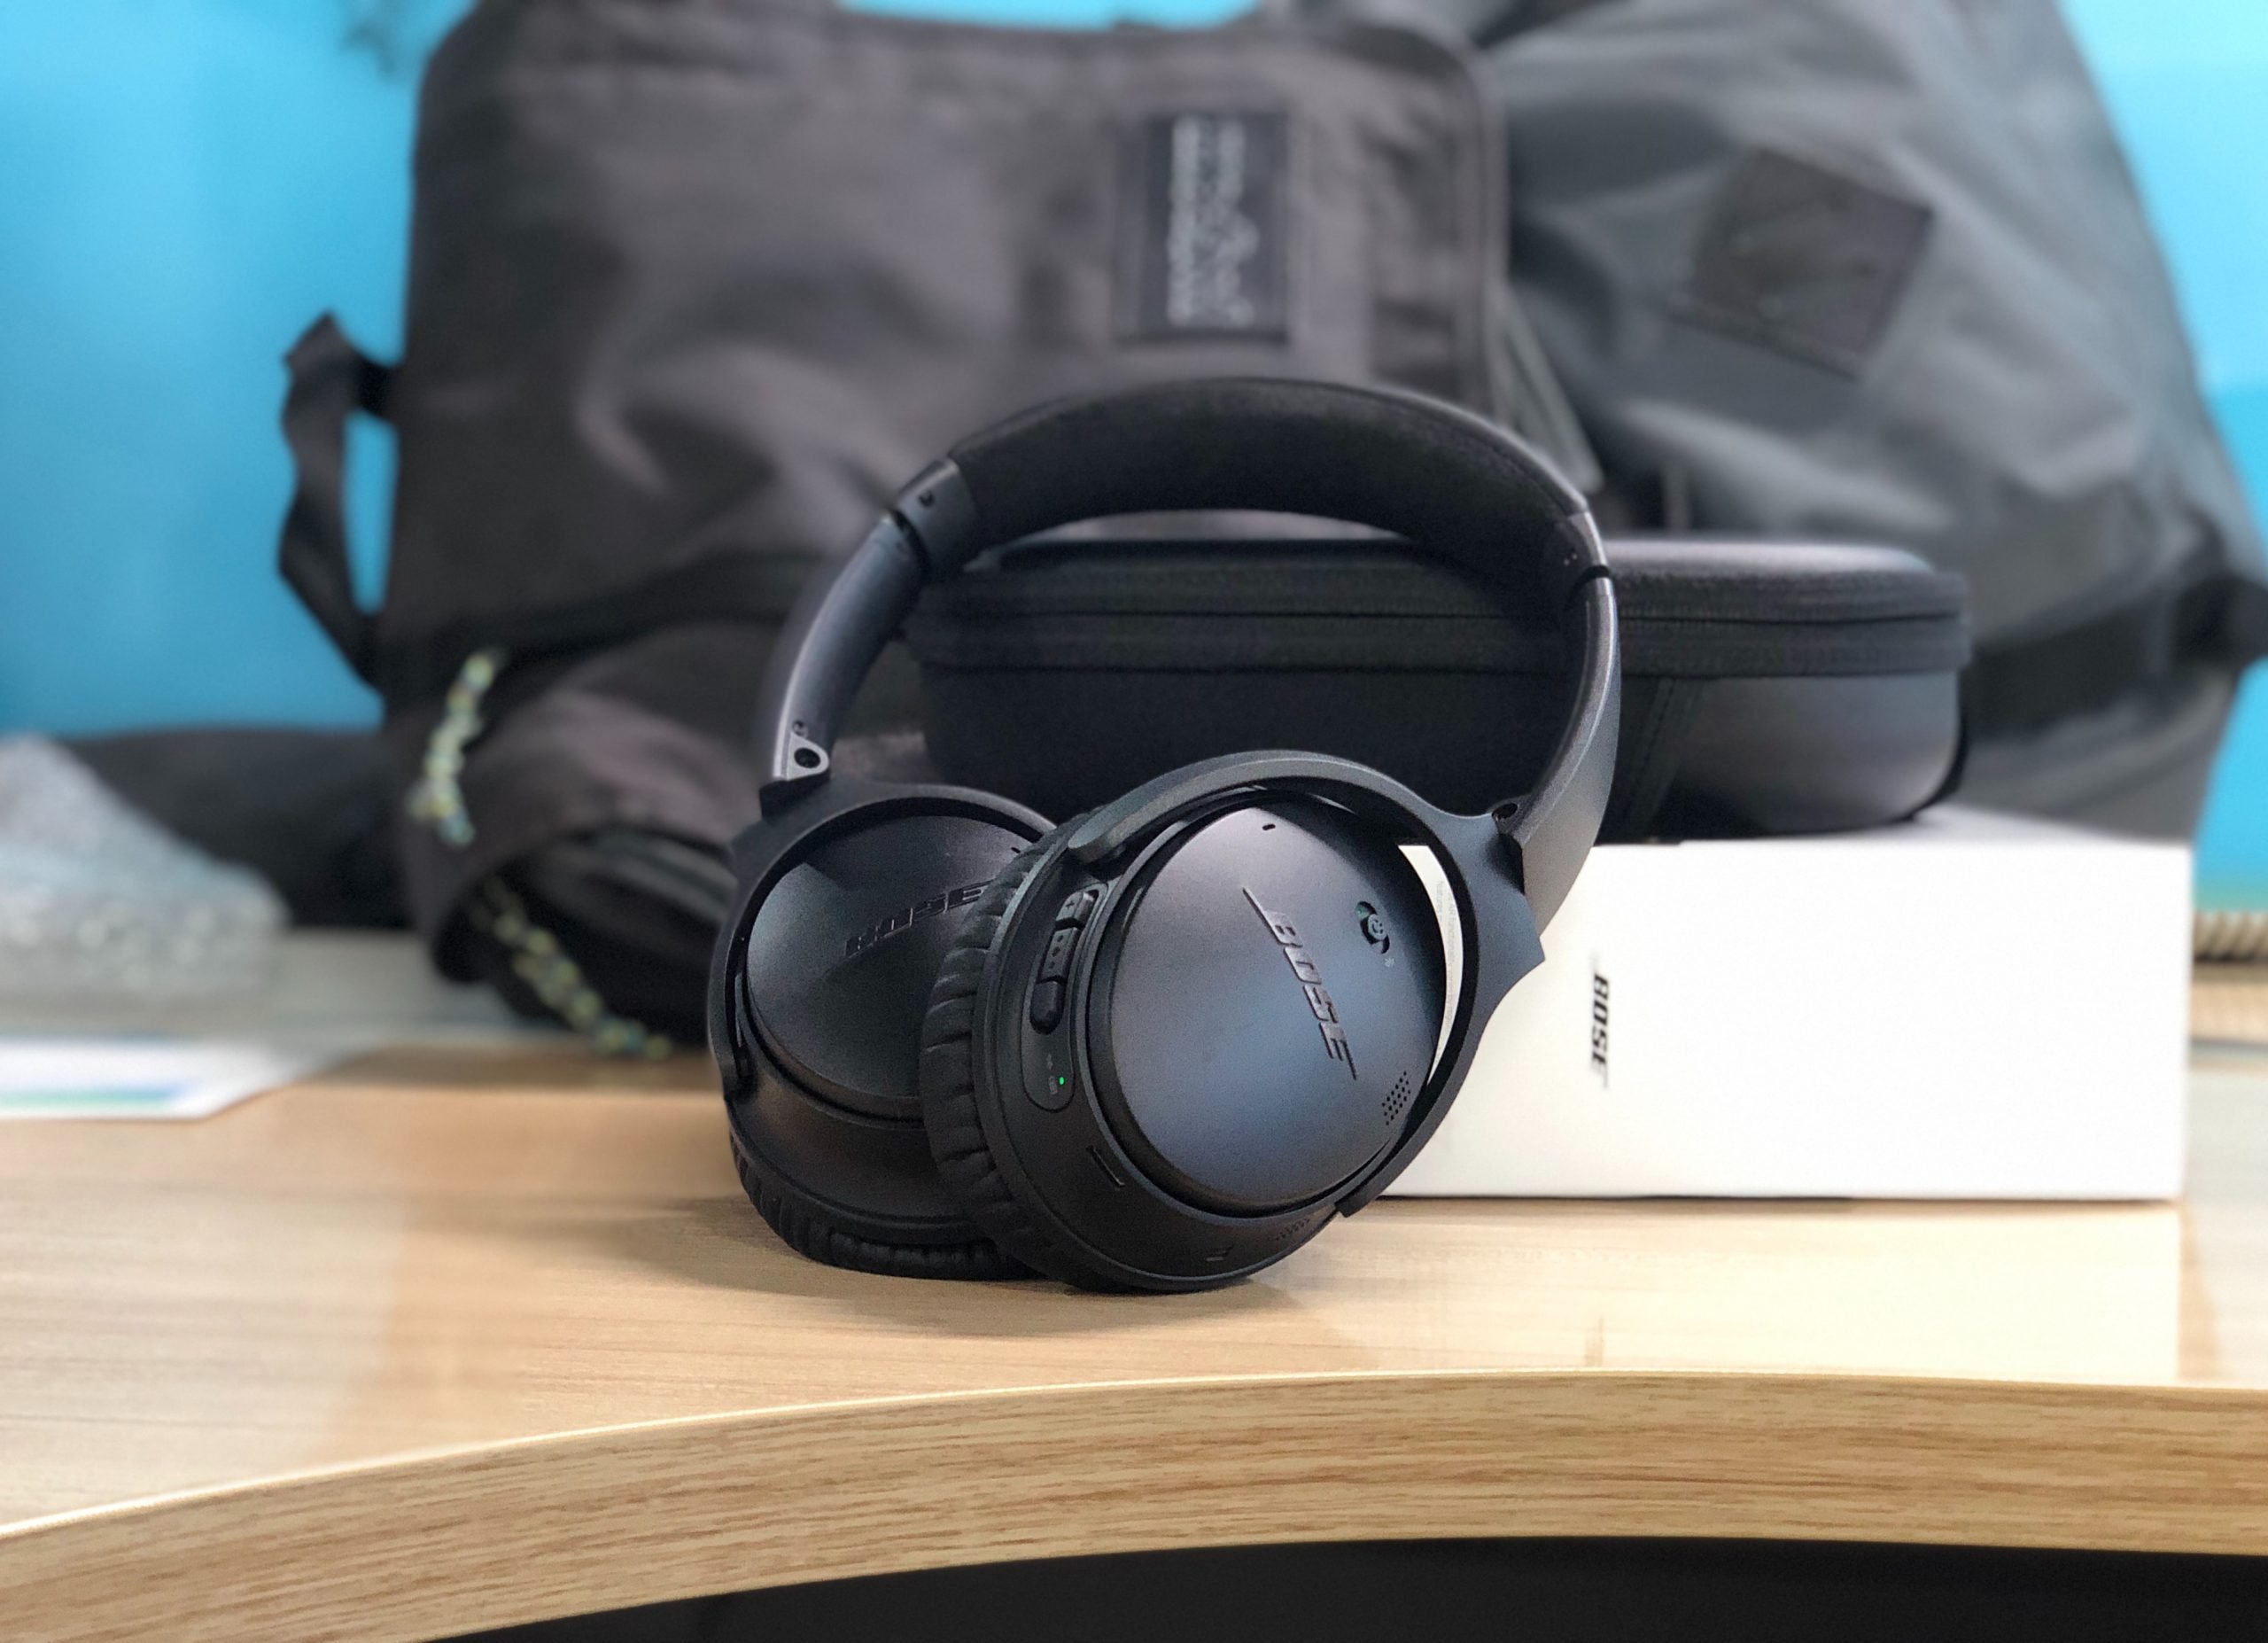 What to Consider When Shopping for Noise-Canceling Headphones